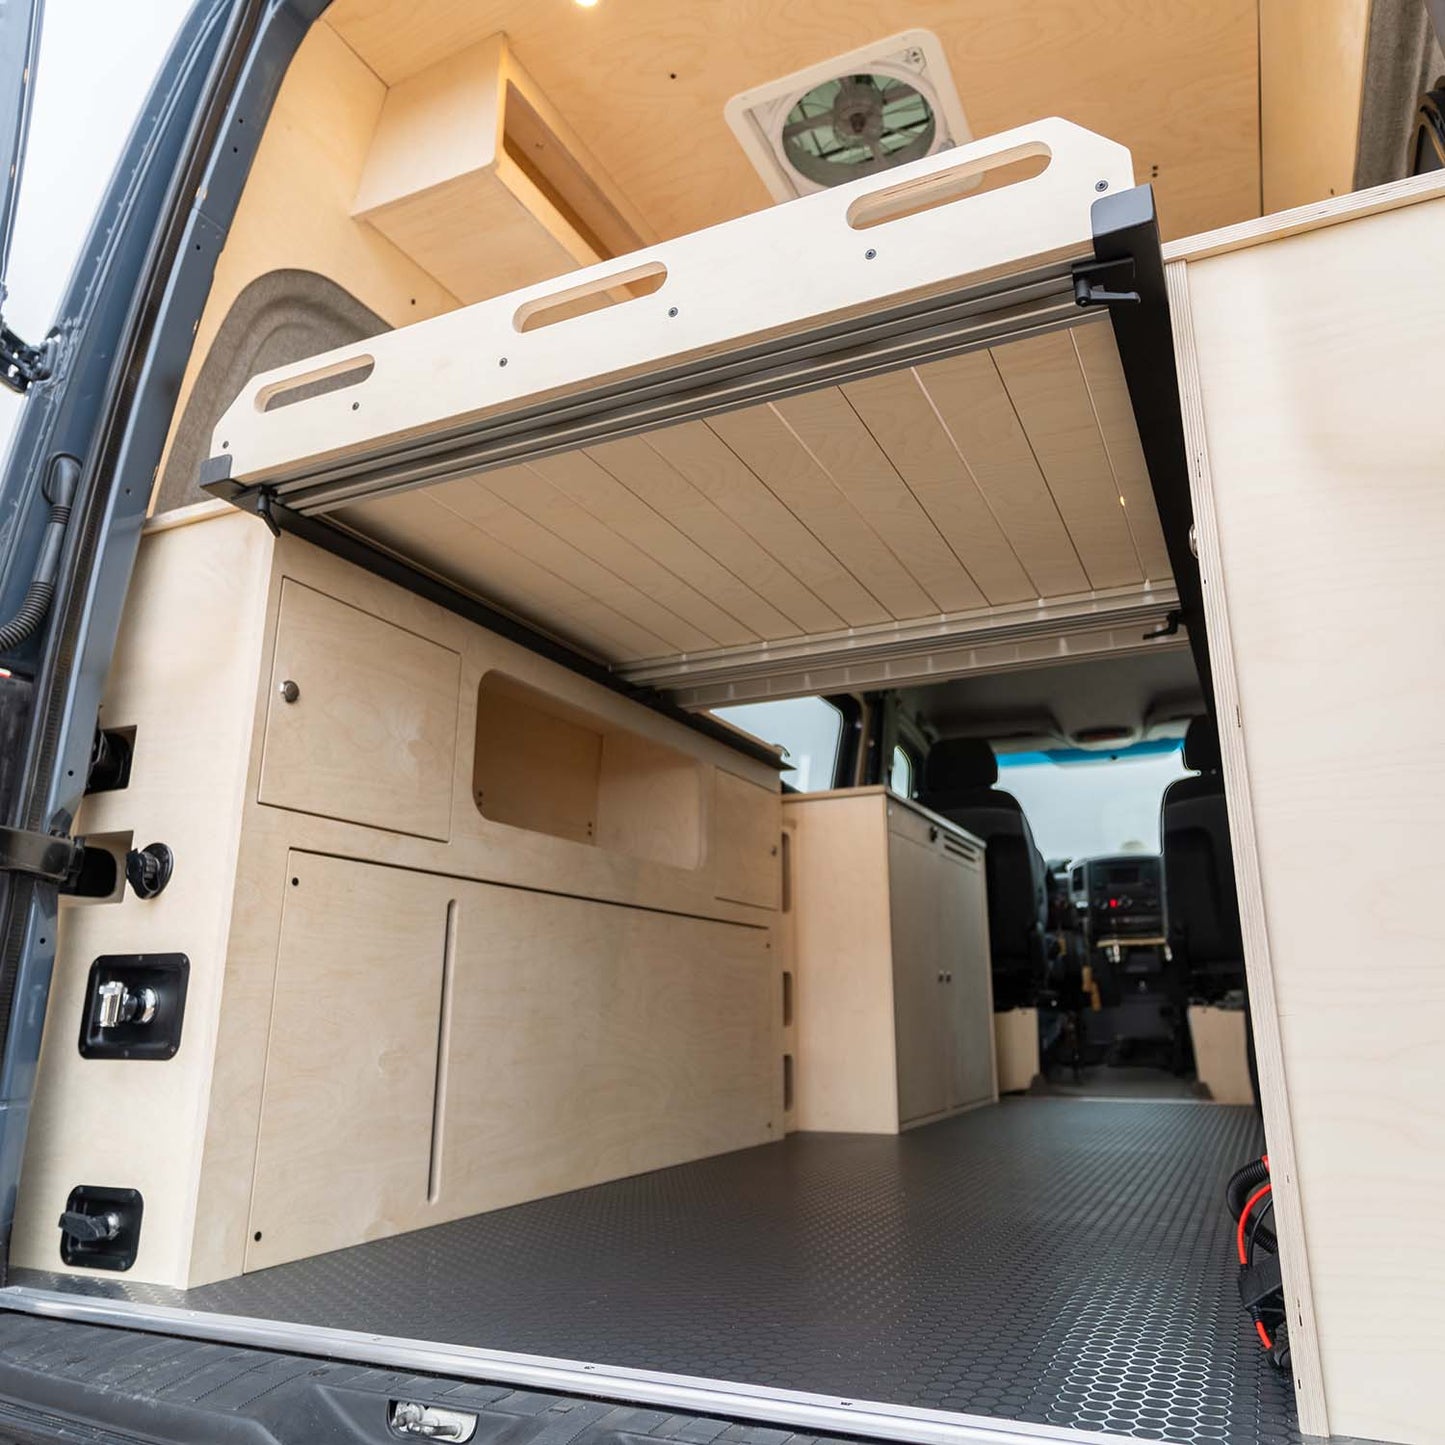 Bed and Wheel Well Cabinets for Sprinter Vans